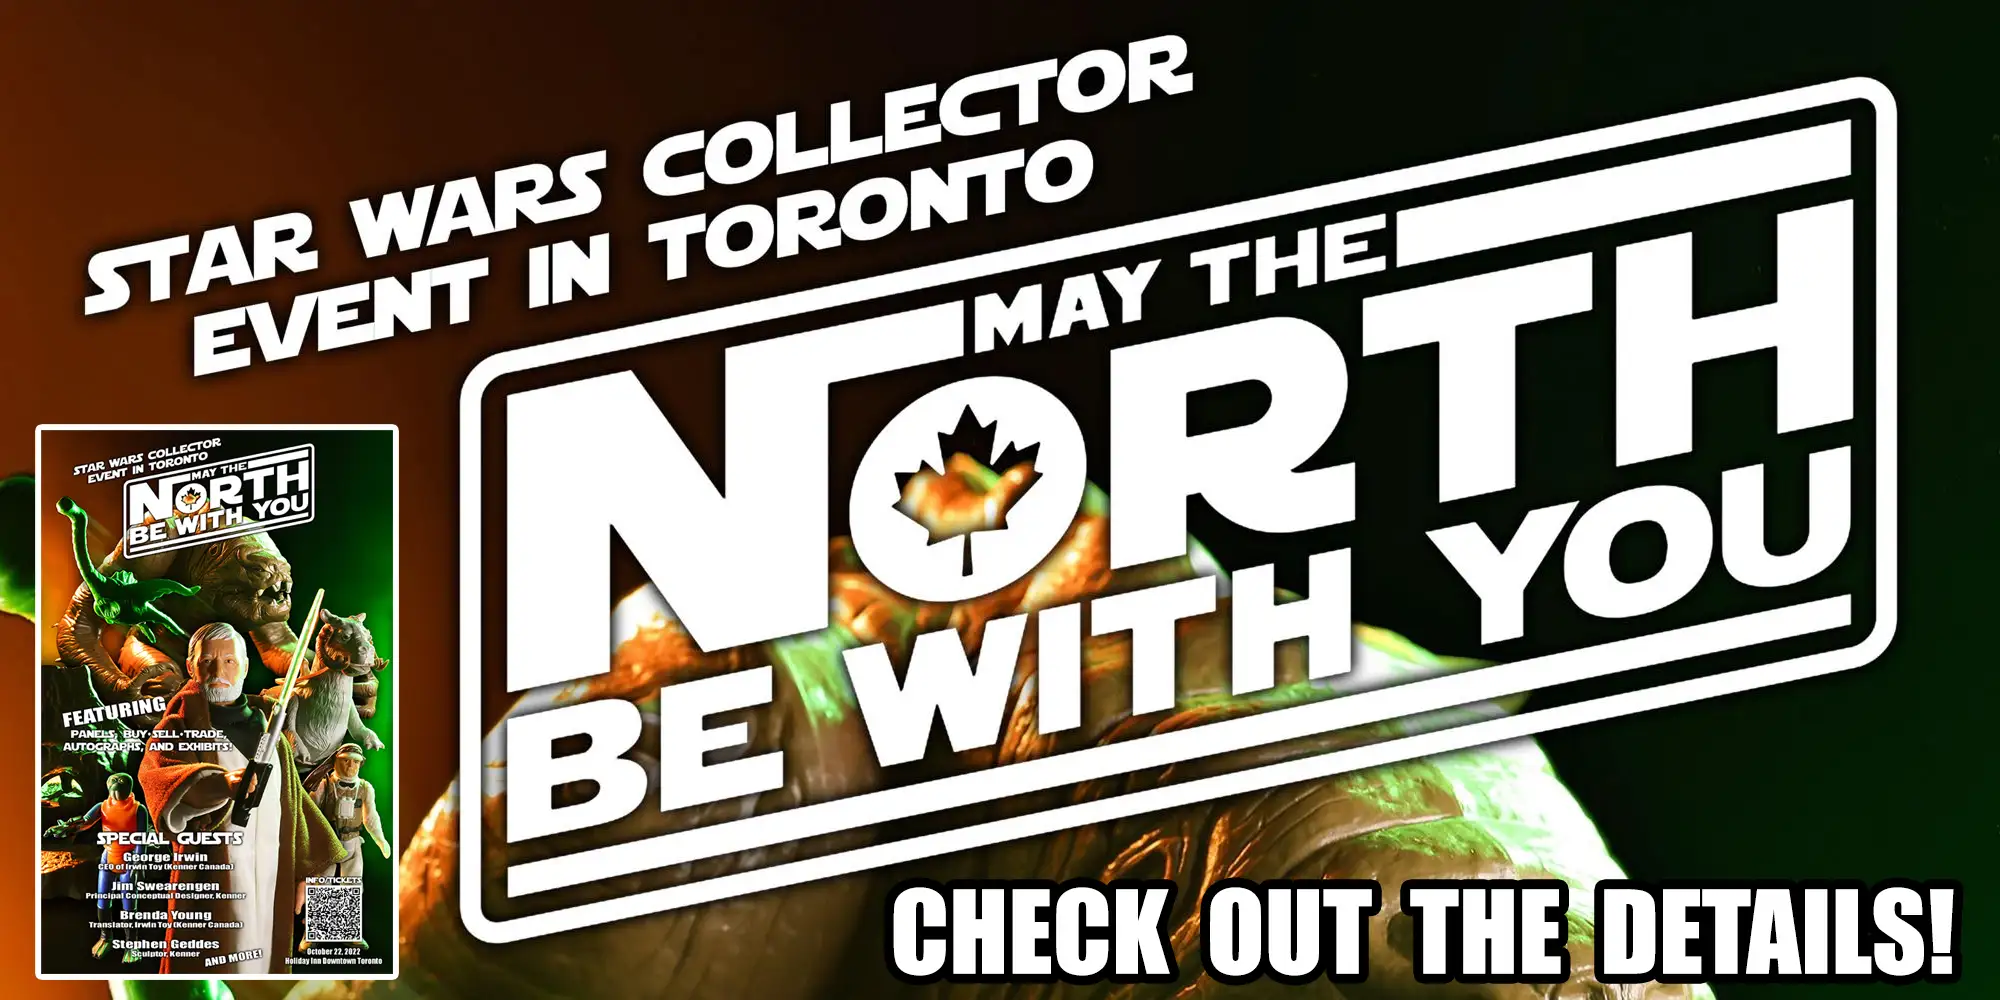 May The North Be With You - Star Wars Collector Event In Toronto